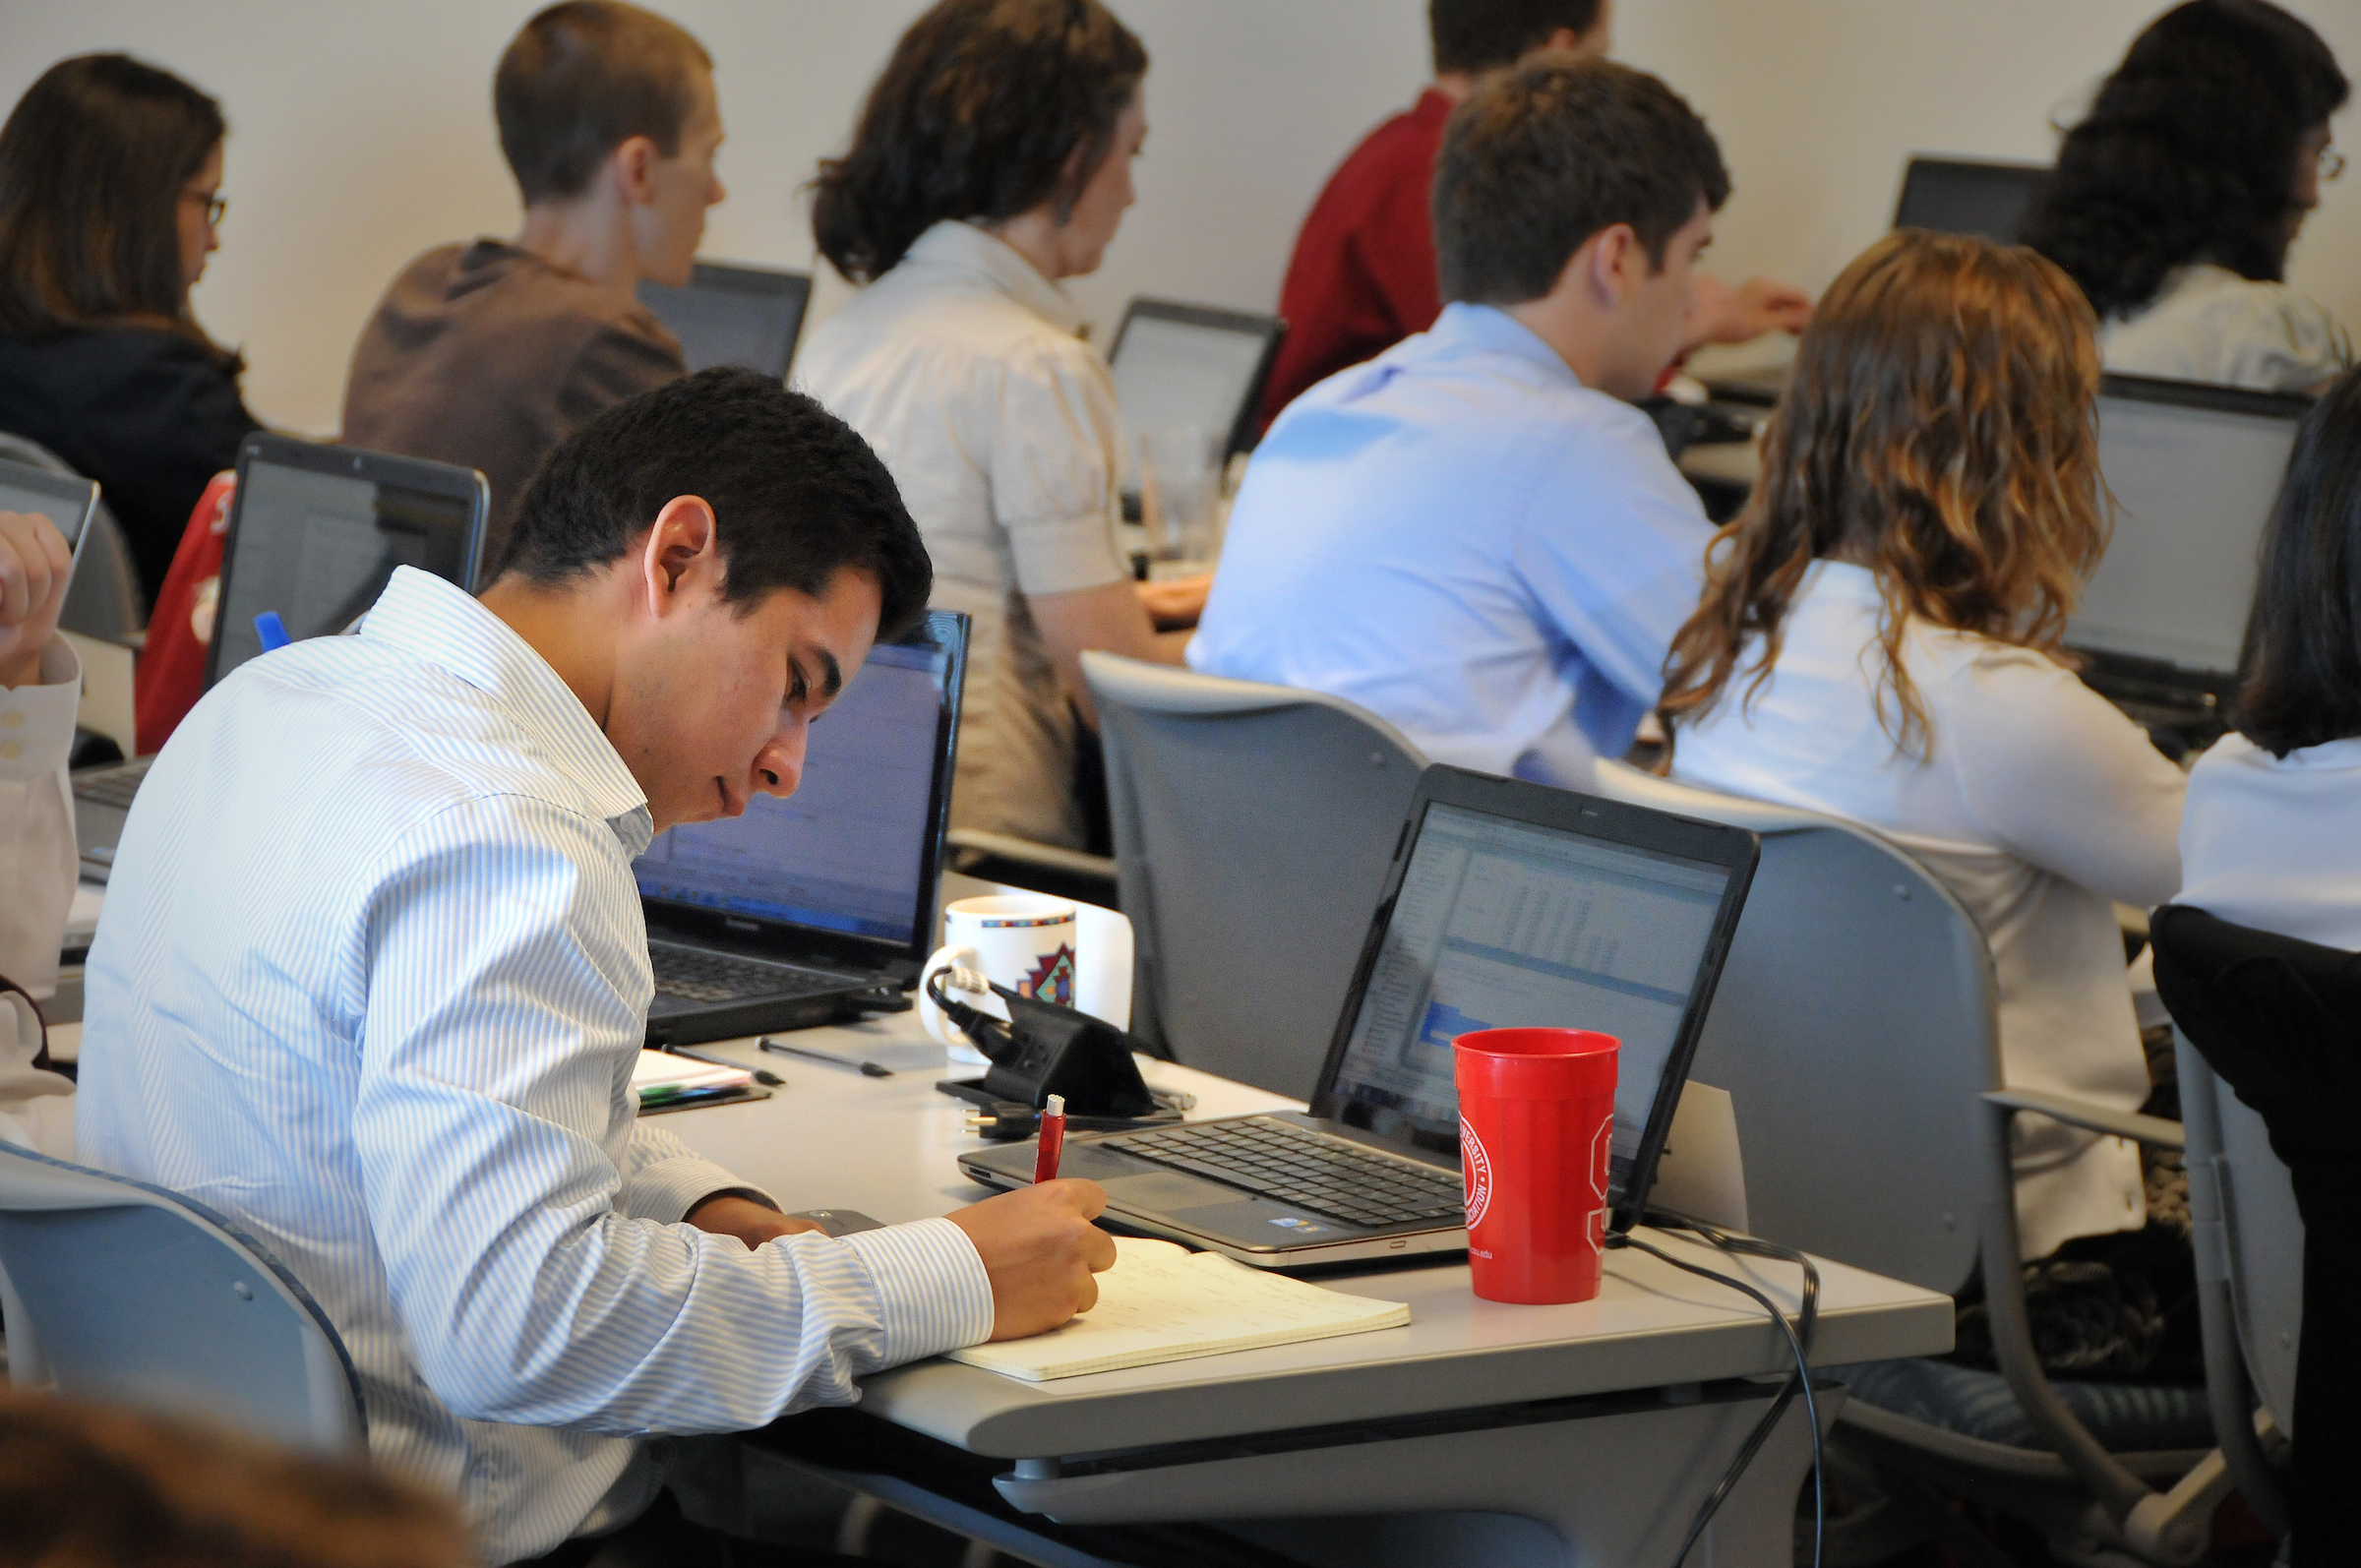 Institiute for Advanced Analytics student takes notes during class on Centennial Campus.